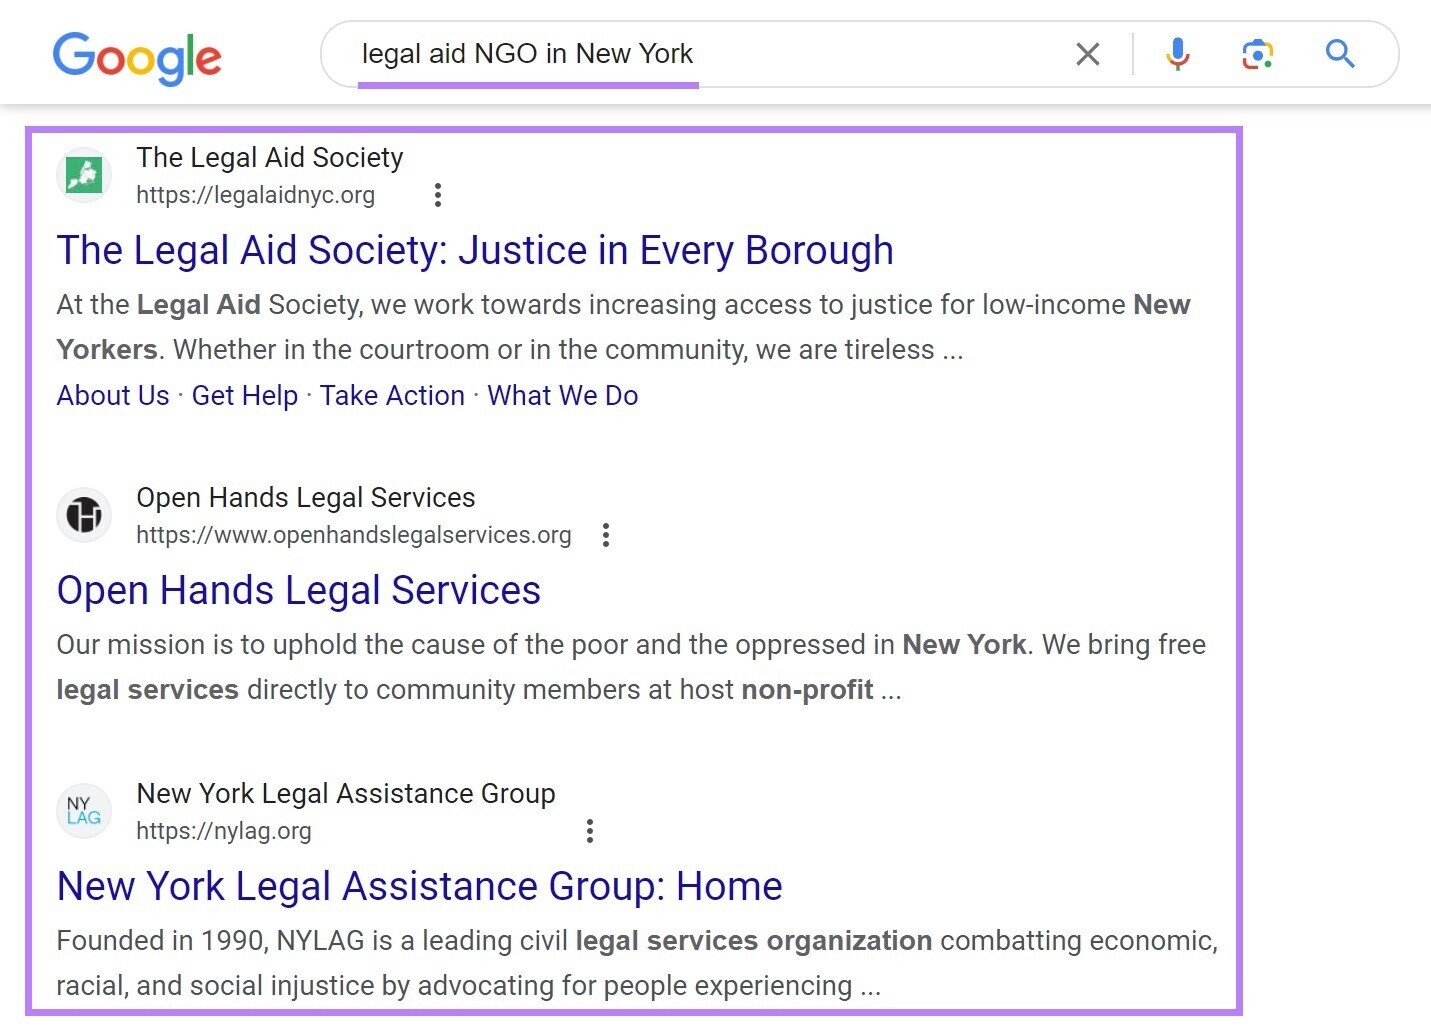 Google SERP for “legal aid NGO in New York”